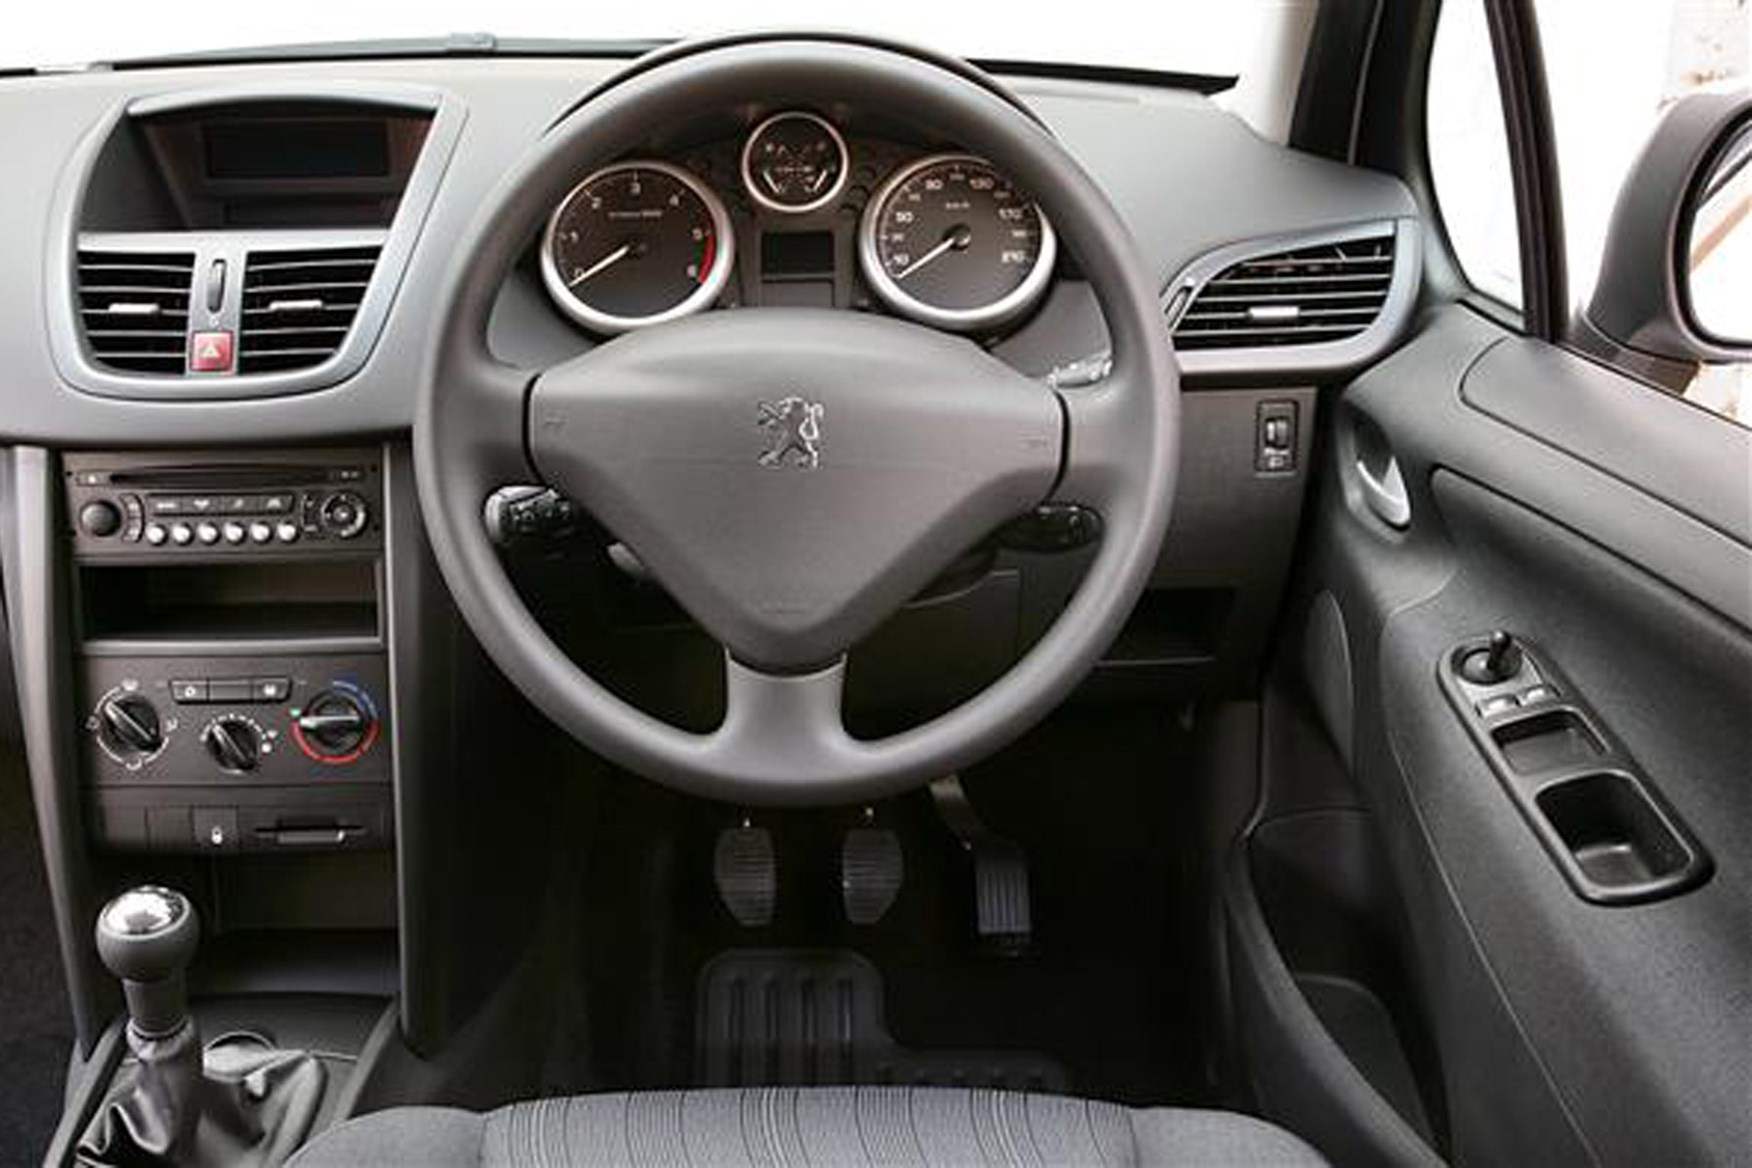 Peugeot 207 Van review on Parkers Vans - in the driver's seat